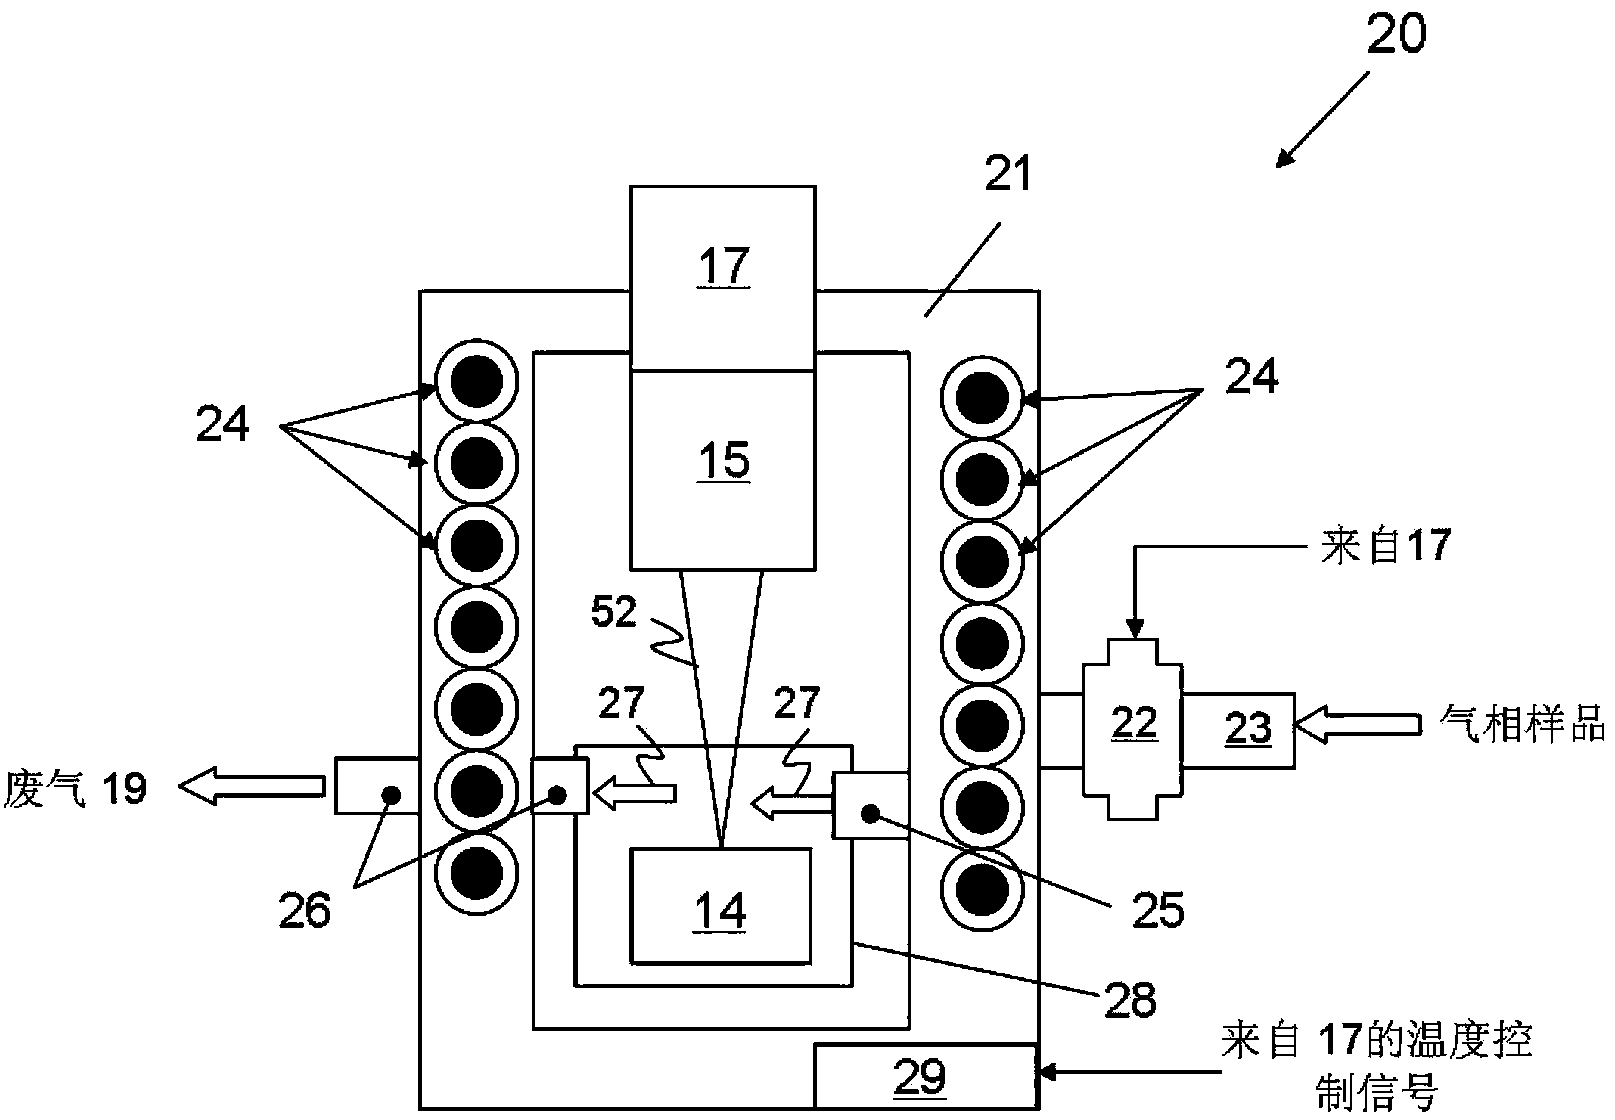 Integrated equipment capable of realizing chemical separation and light dispersion